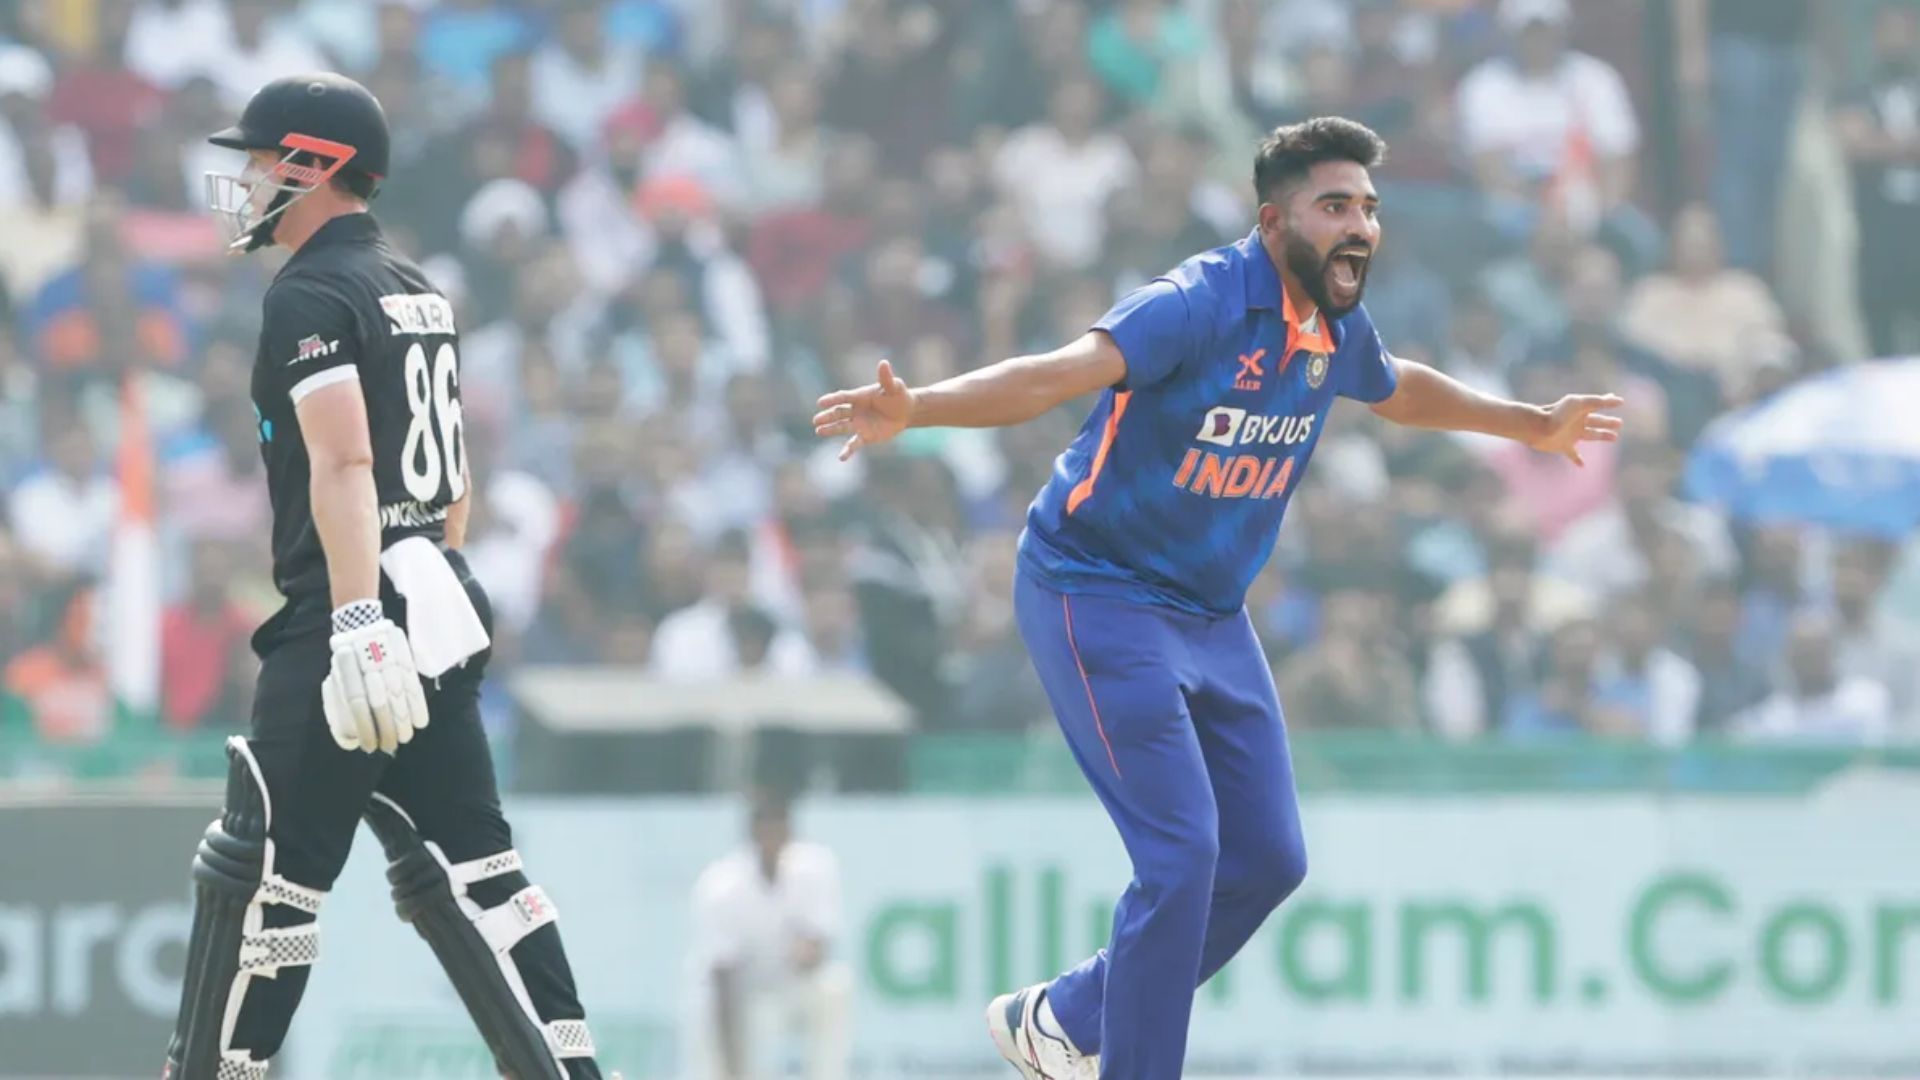 On numerous occasions in just the 3-match ODI series against NZ, Siraj was brought back into the attack to pick up wickets and did just that. (Image Courtesy: bcci.tv)